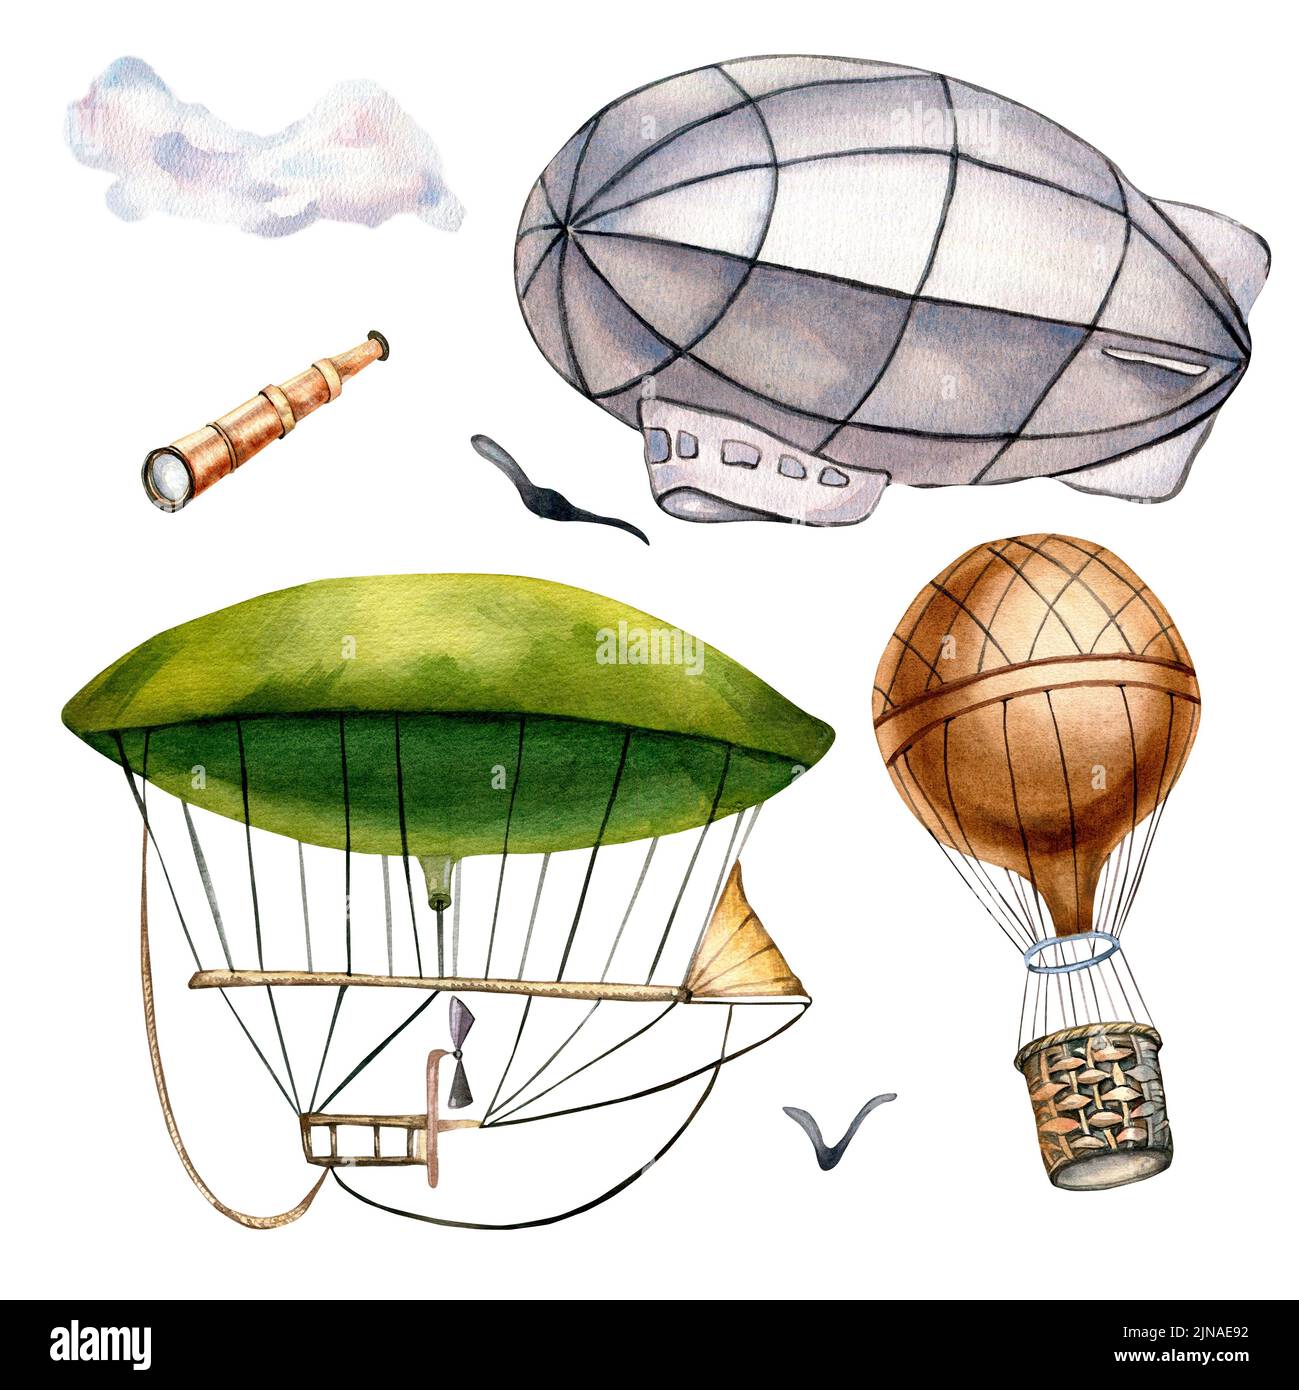 Set of vintage aerostats watercolor illustration isolated on white background. Retro dirigible, hot air balloon in the clouds, spyglass hand drawn. De Stock Photo